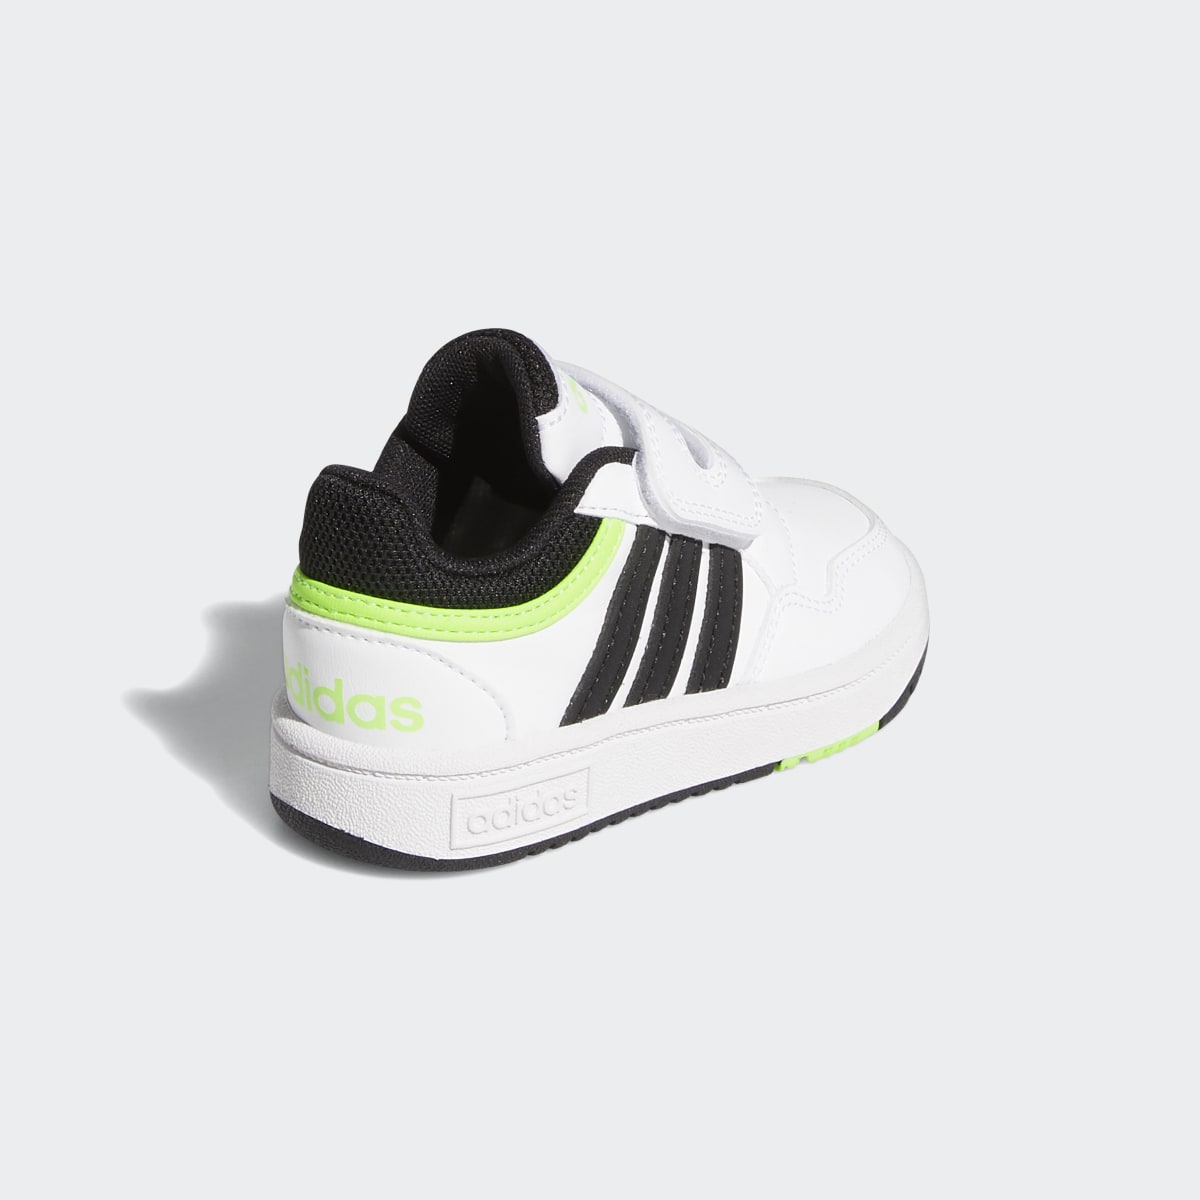 Adidas Hoops Shoes. 6